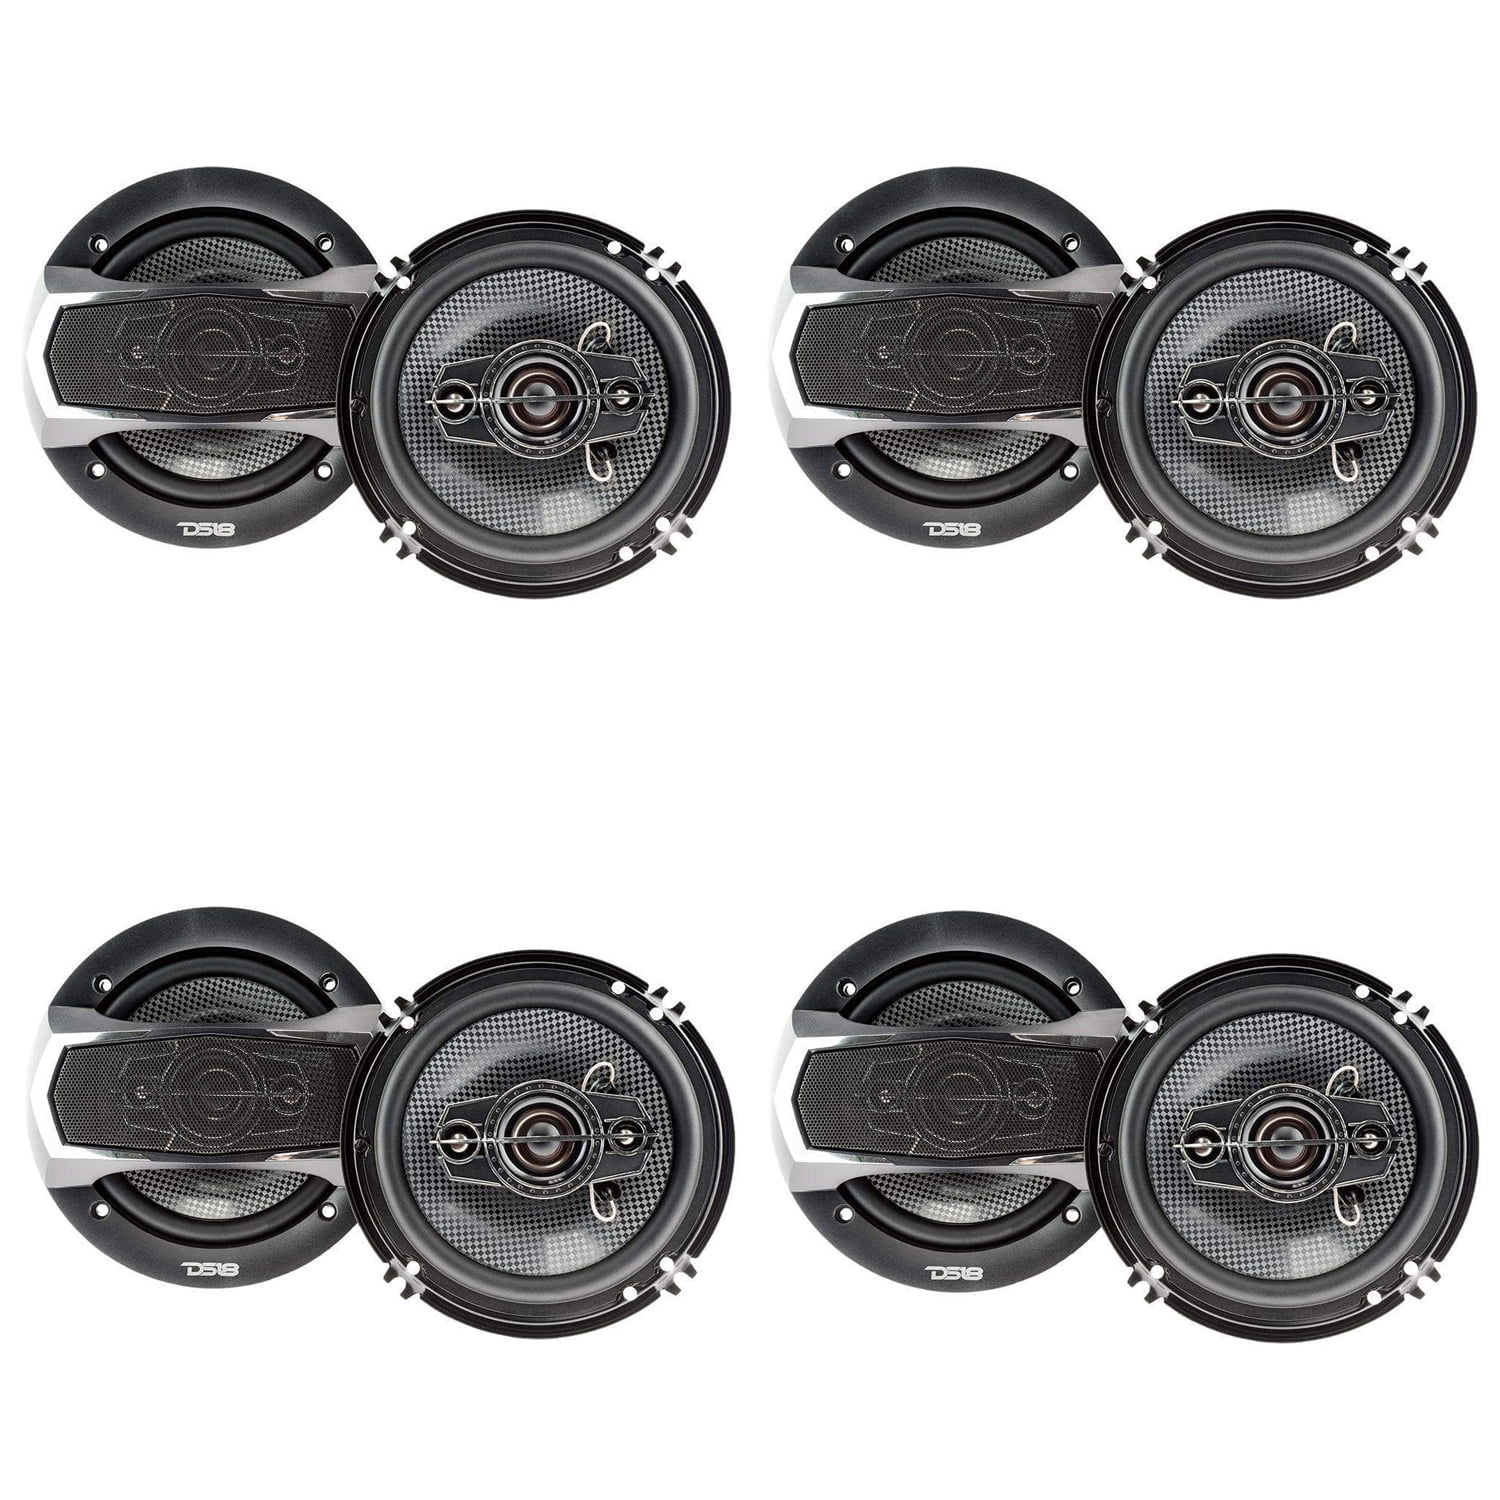 DS18 SLC-N65X 6.5" 4 Way Car Stereo Speakers 400W Max 4 ohm Coaxials Set of 2 